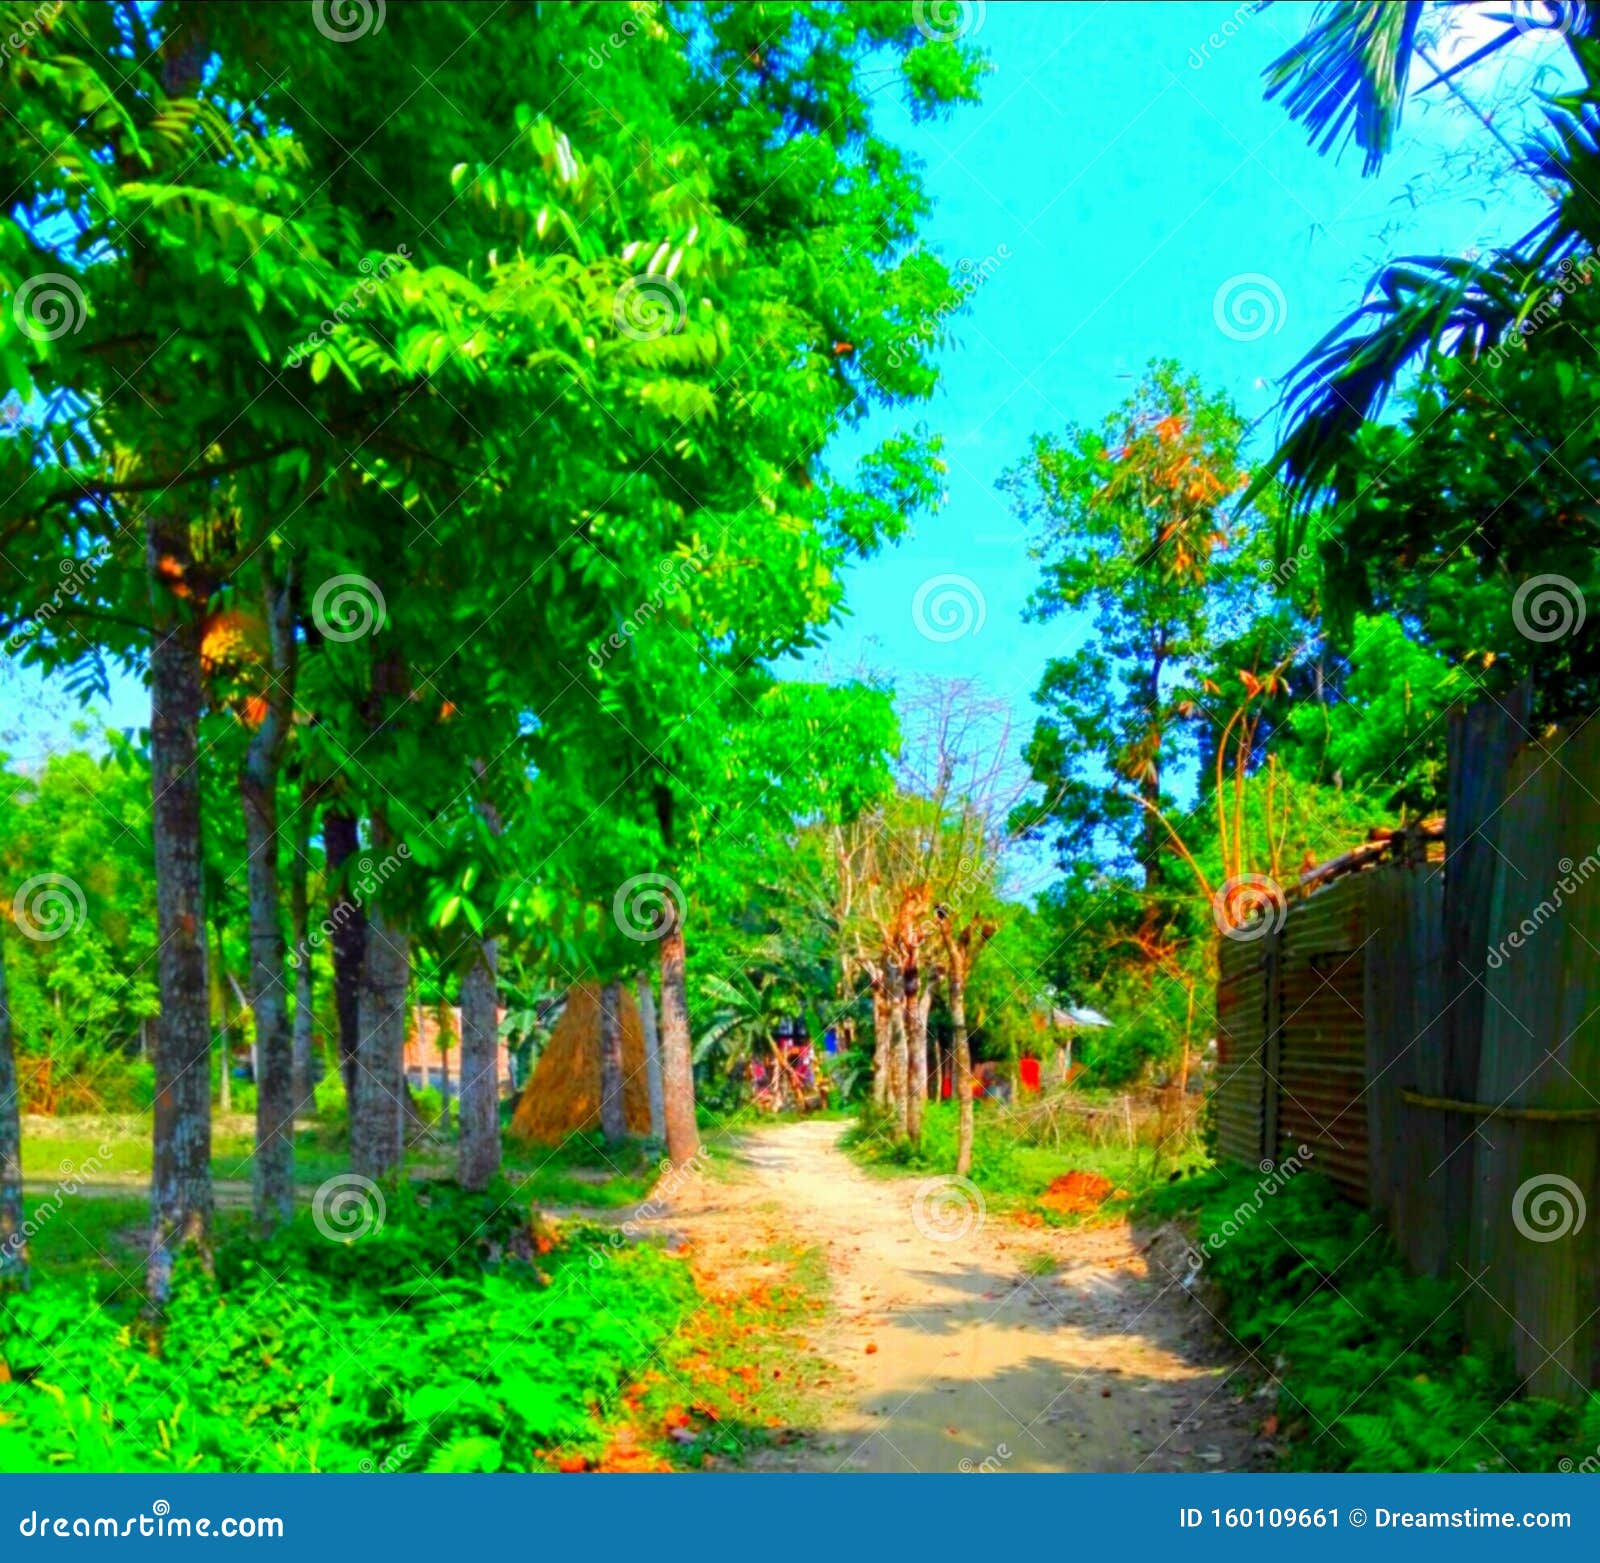 My Home Way Stock Image Image Of Fullhd Homeway Village 160109661